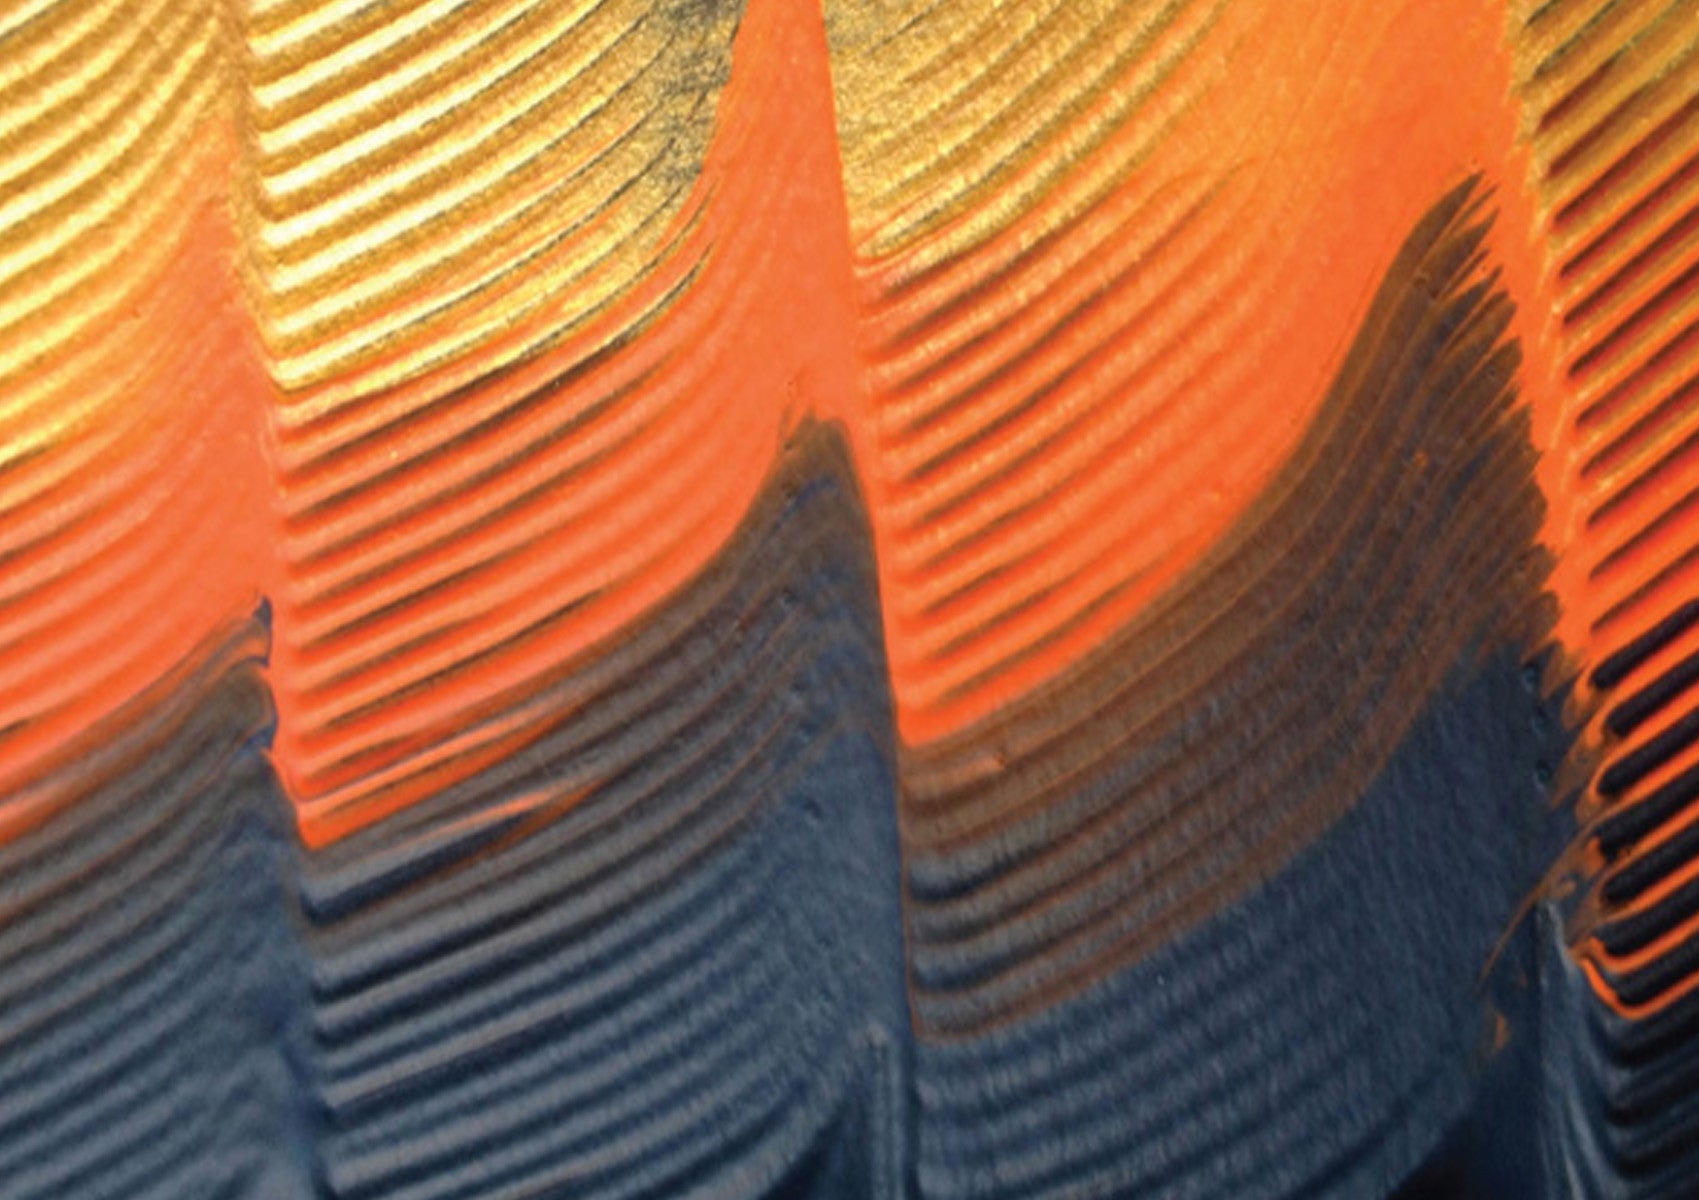 Close up of Khu Khu Kingfisher Premium Tropical Bird Wing Print Hand-Fan in orange and gold tones. Painted and then printed onto high grade cotton with swiss acrylic bespoke shape black sticks. Orange rivet and gold rim. Engraved logo. 